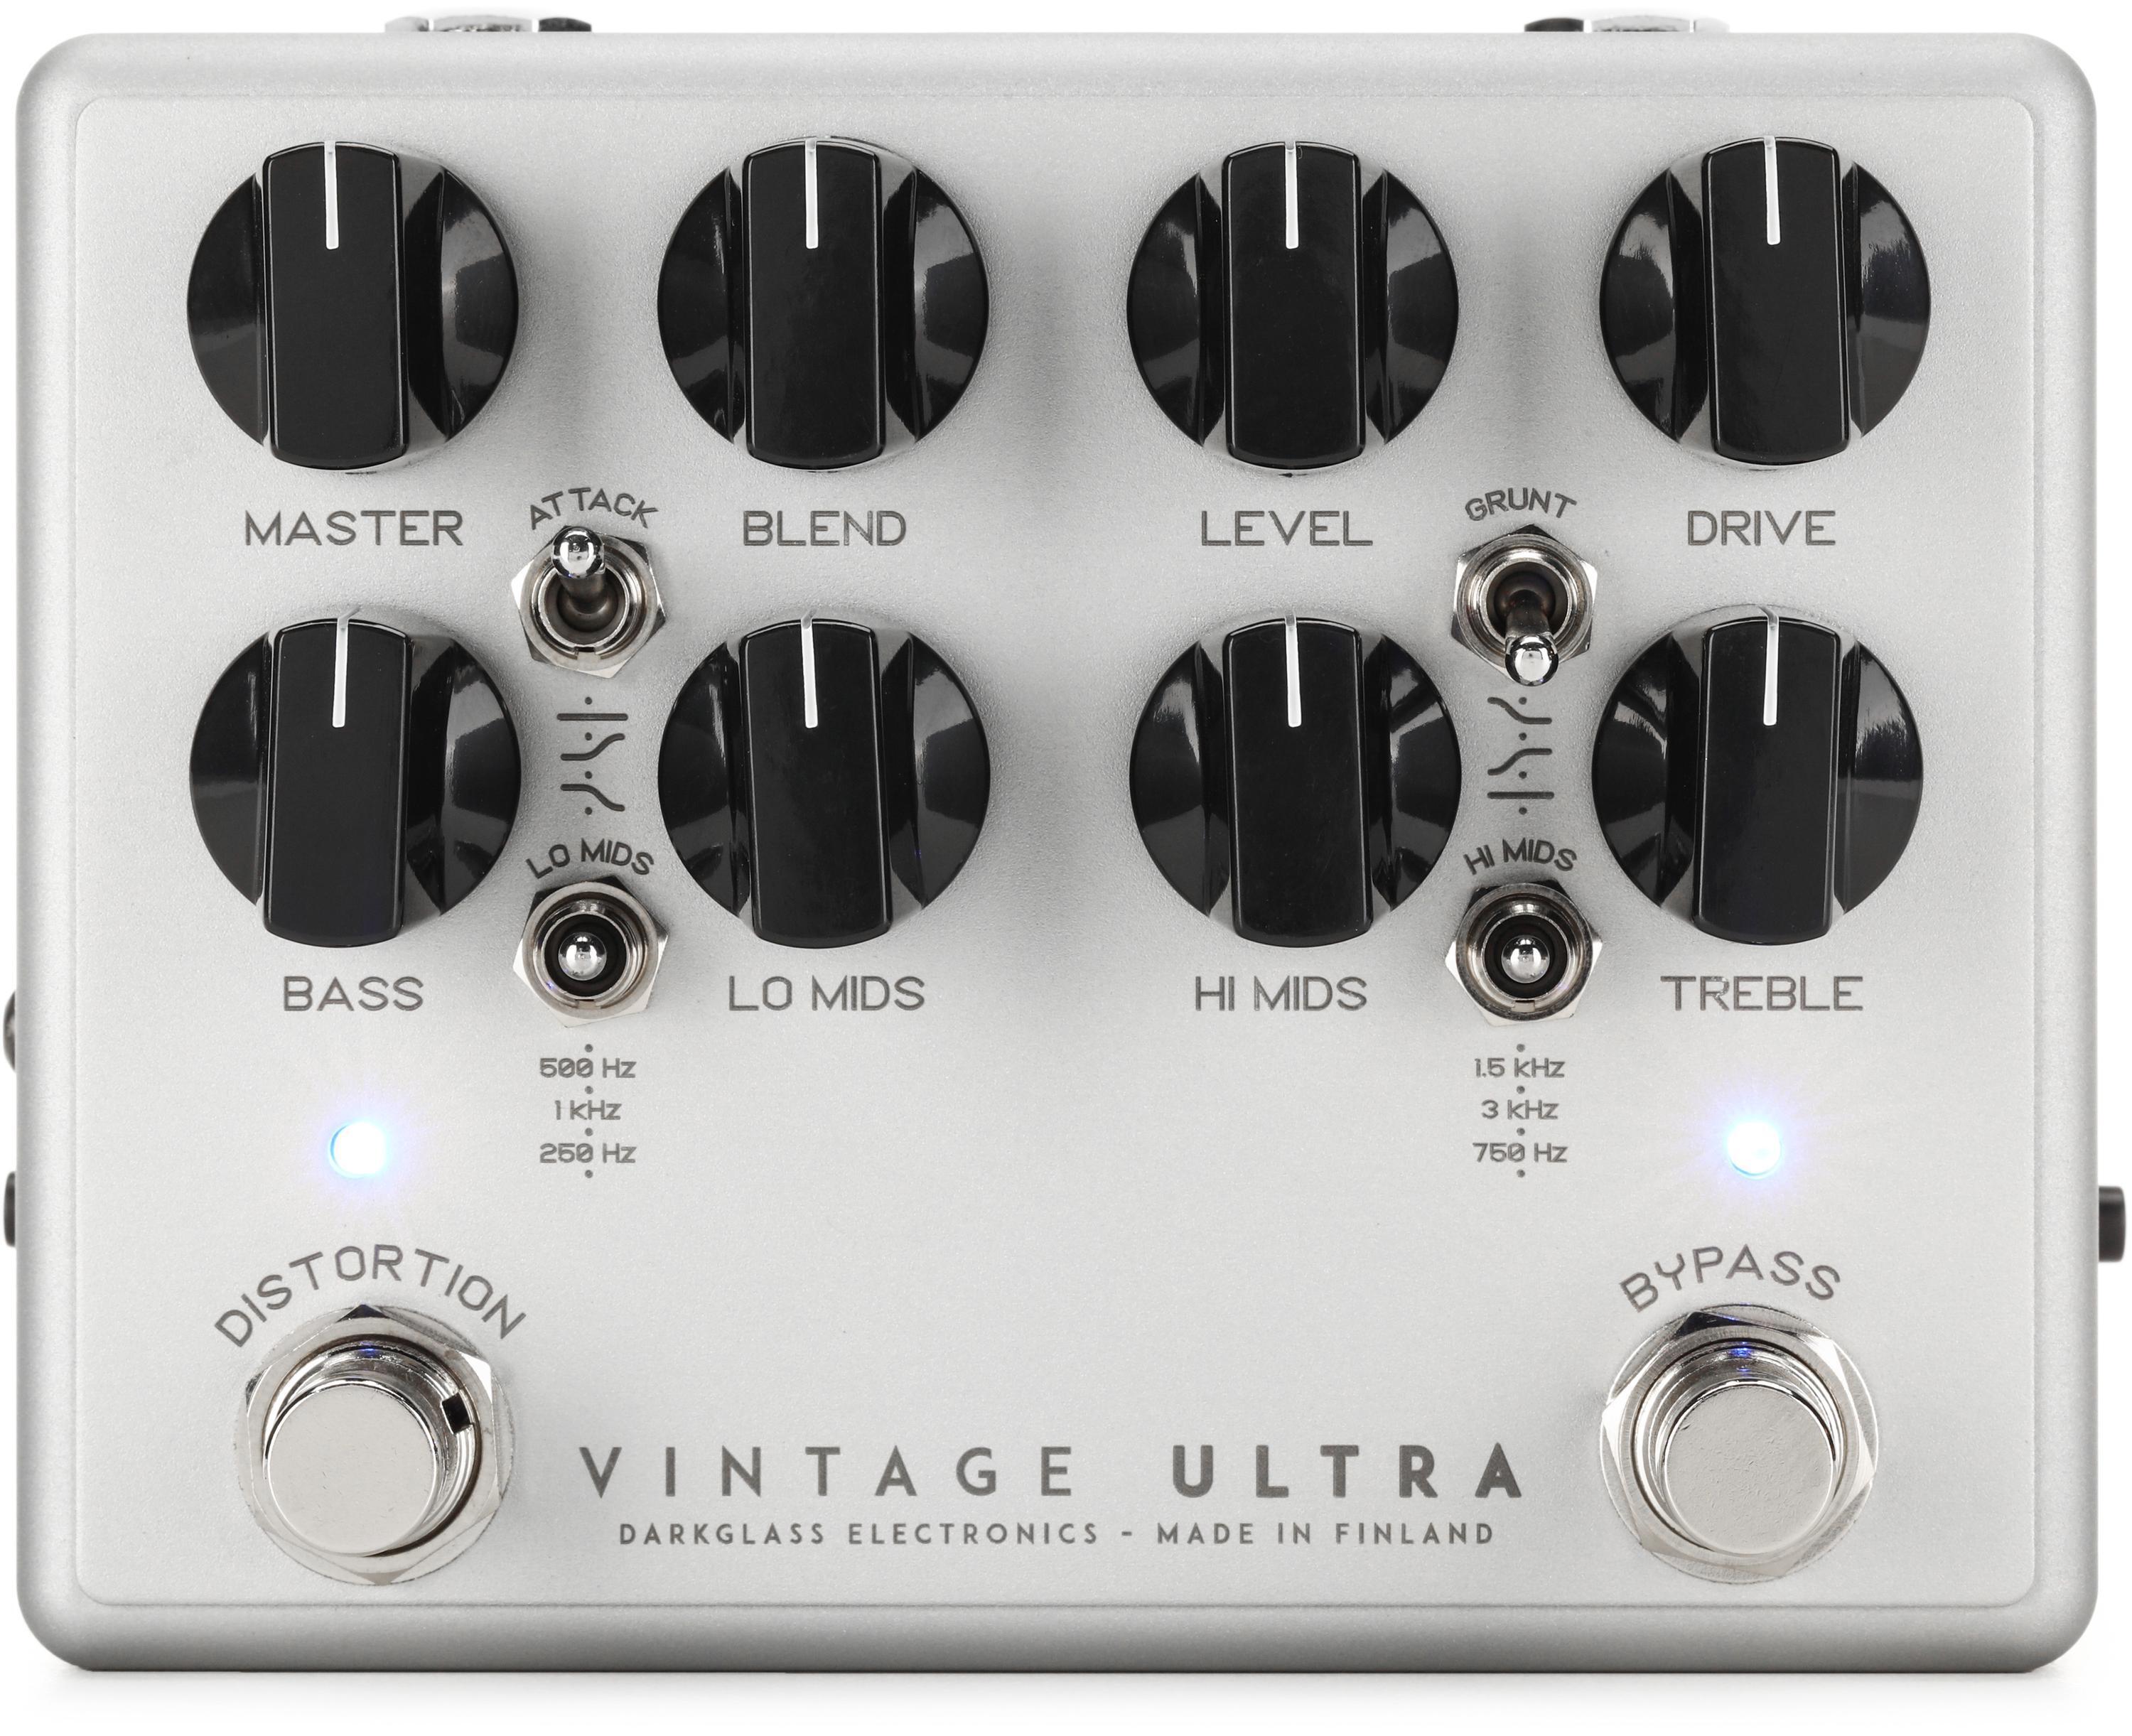 Darkglass Vintage Ultra V2 Bass Preamp Pedal with Aux In | Sweetwater